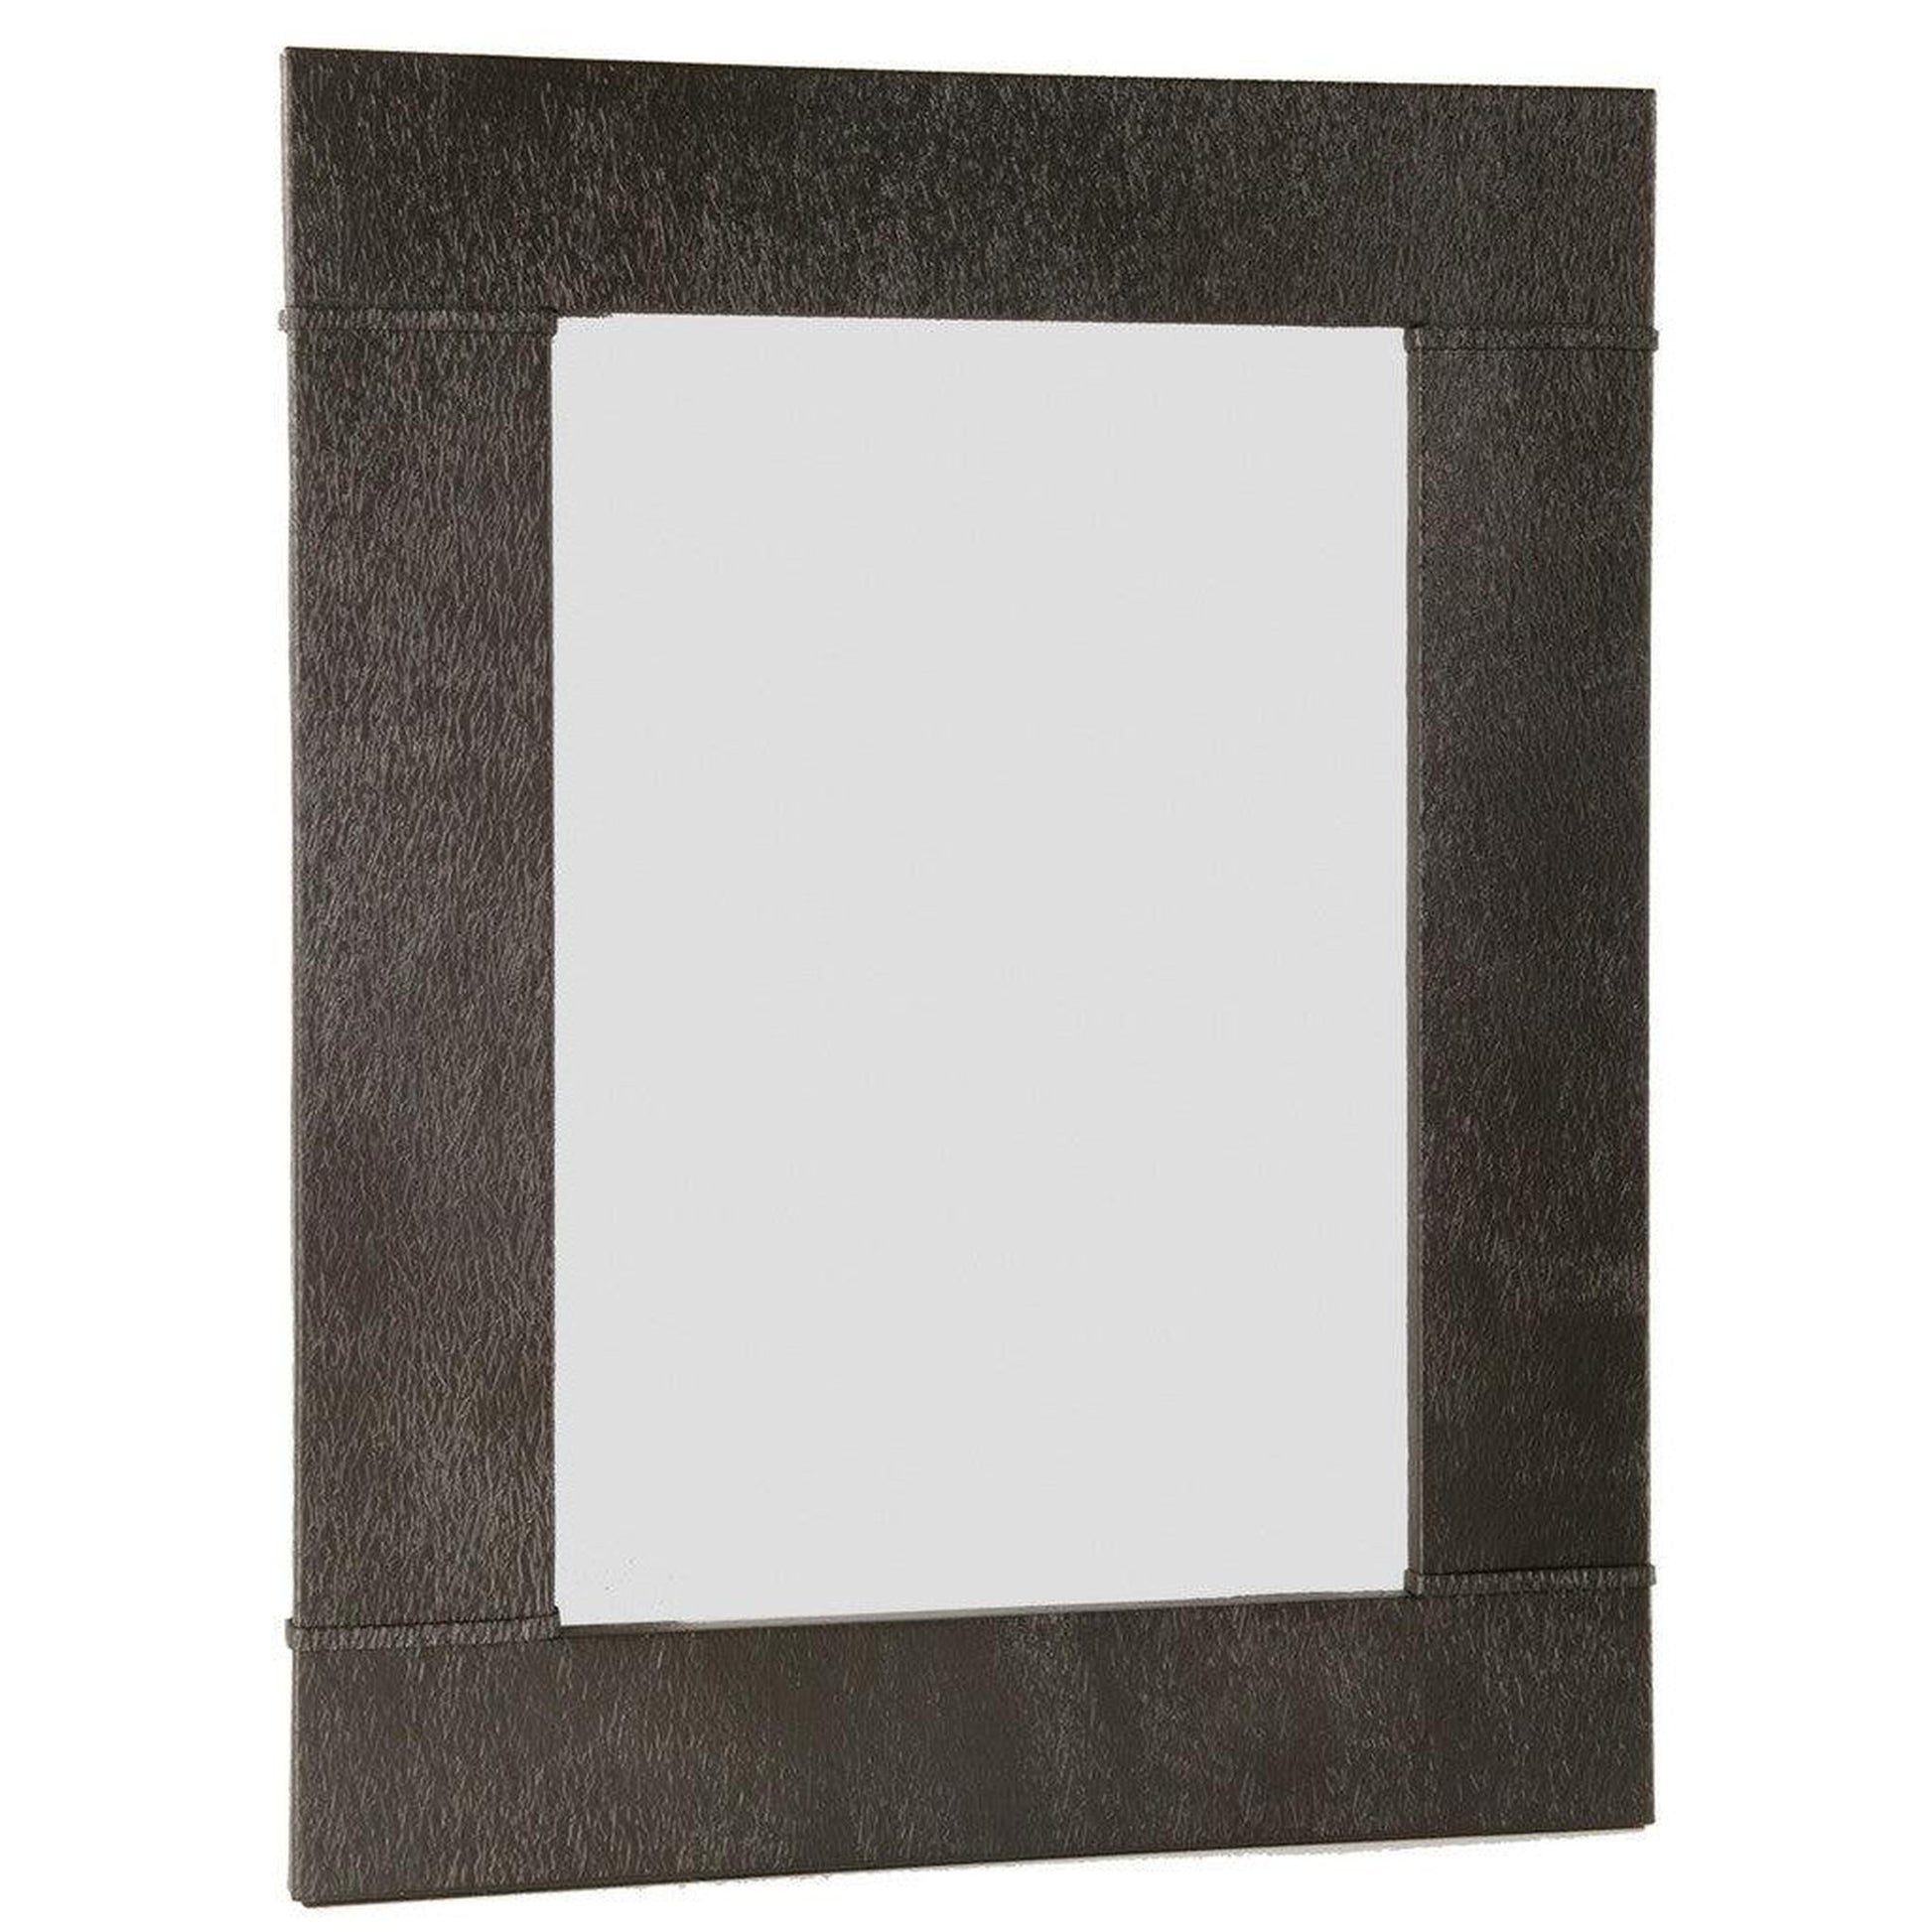 Stone County Ironworks Cedarvale 37" x 45" Large Chalk White Iron Wall Mirror With Gold Iron Accent